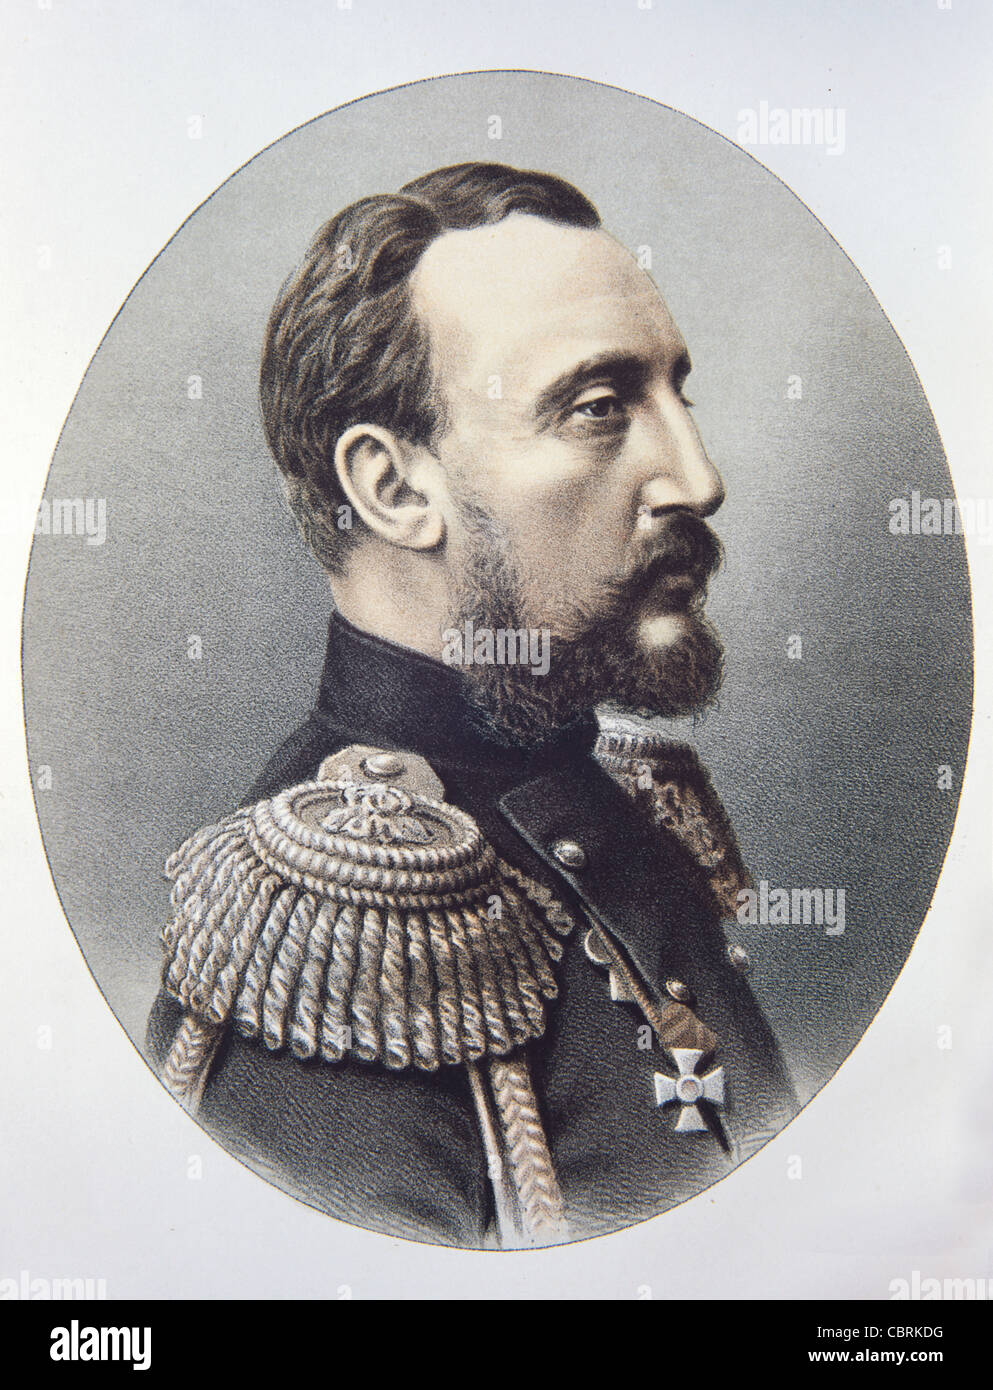 Portrait of Grand Duke Nicholas Nicholaevich of Russia (1831-1891) the Elder. General Field Marshal of the Russian Army. Colour lithograph c1880 or Vintage Illustration Stock Photo